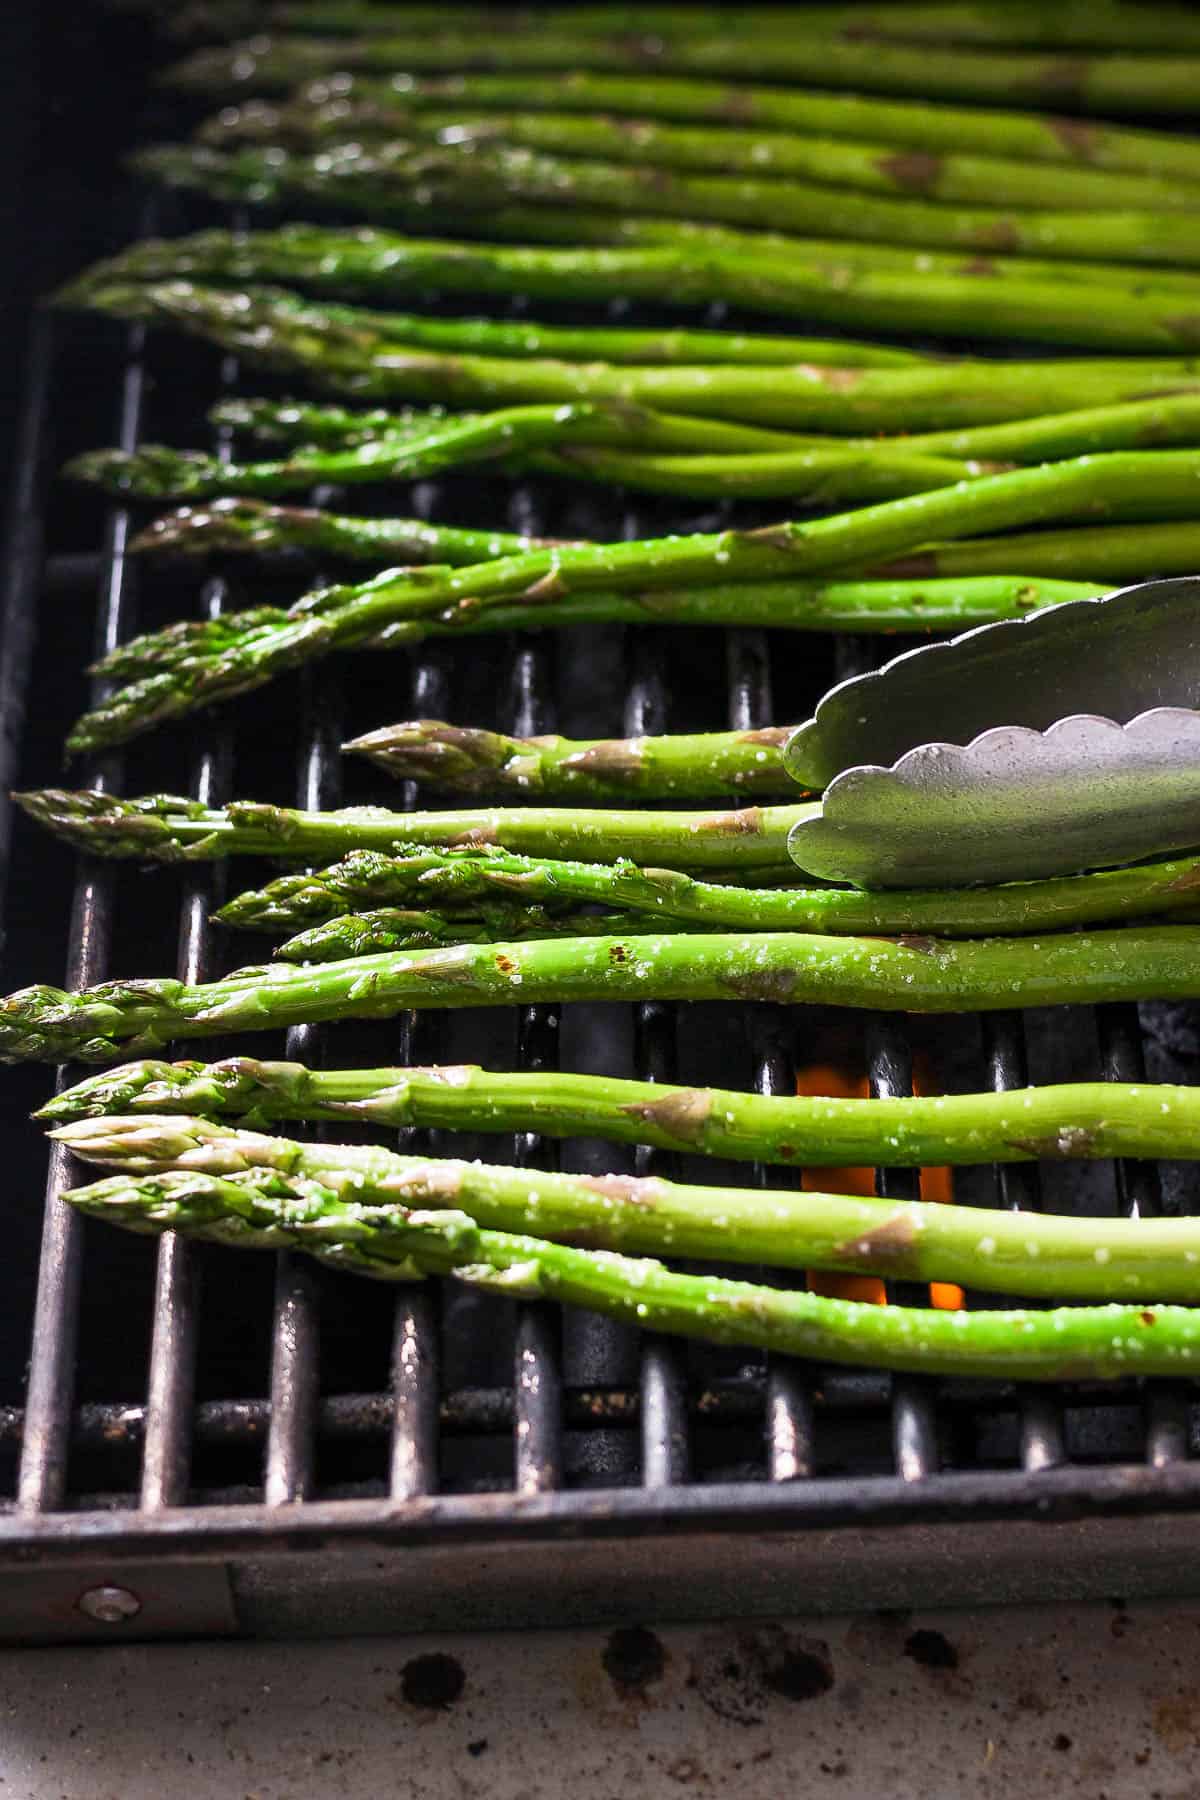 Asparagus cooking on the grill grates and a pair of tongs rotating them.